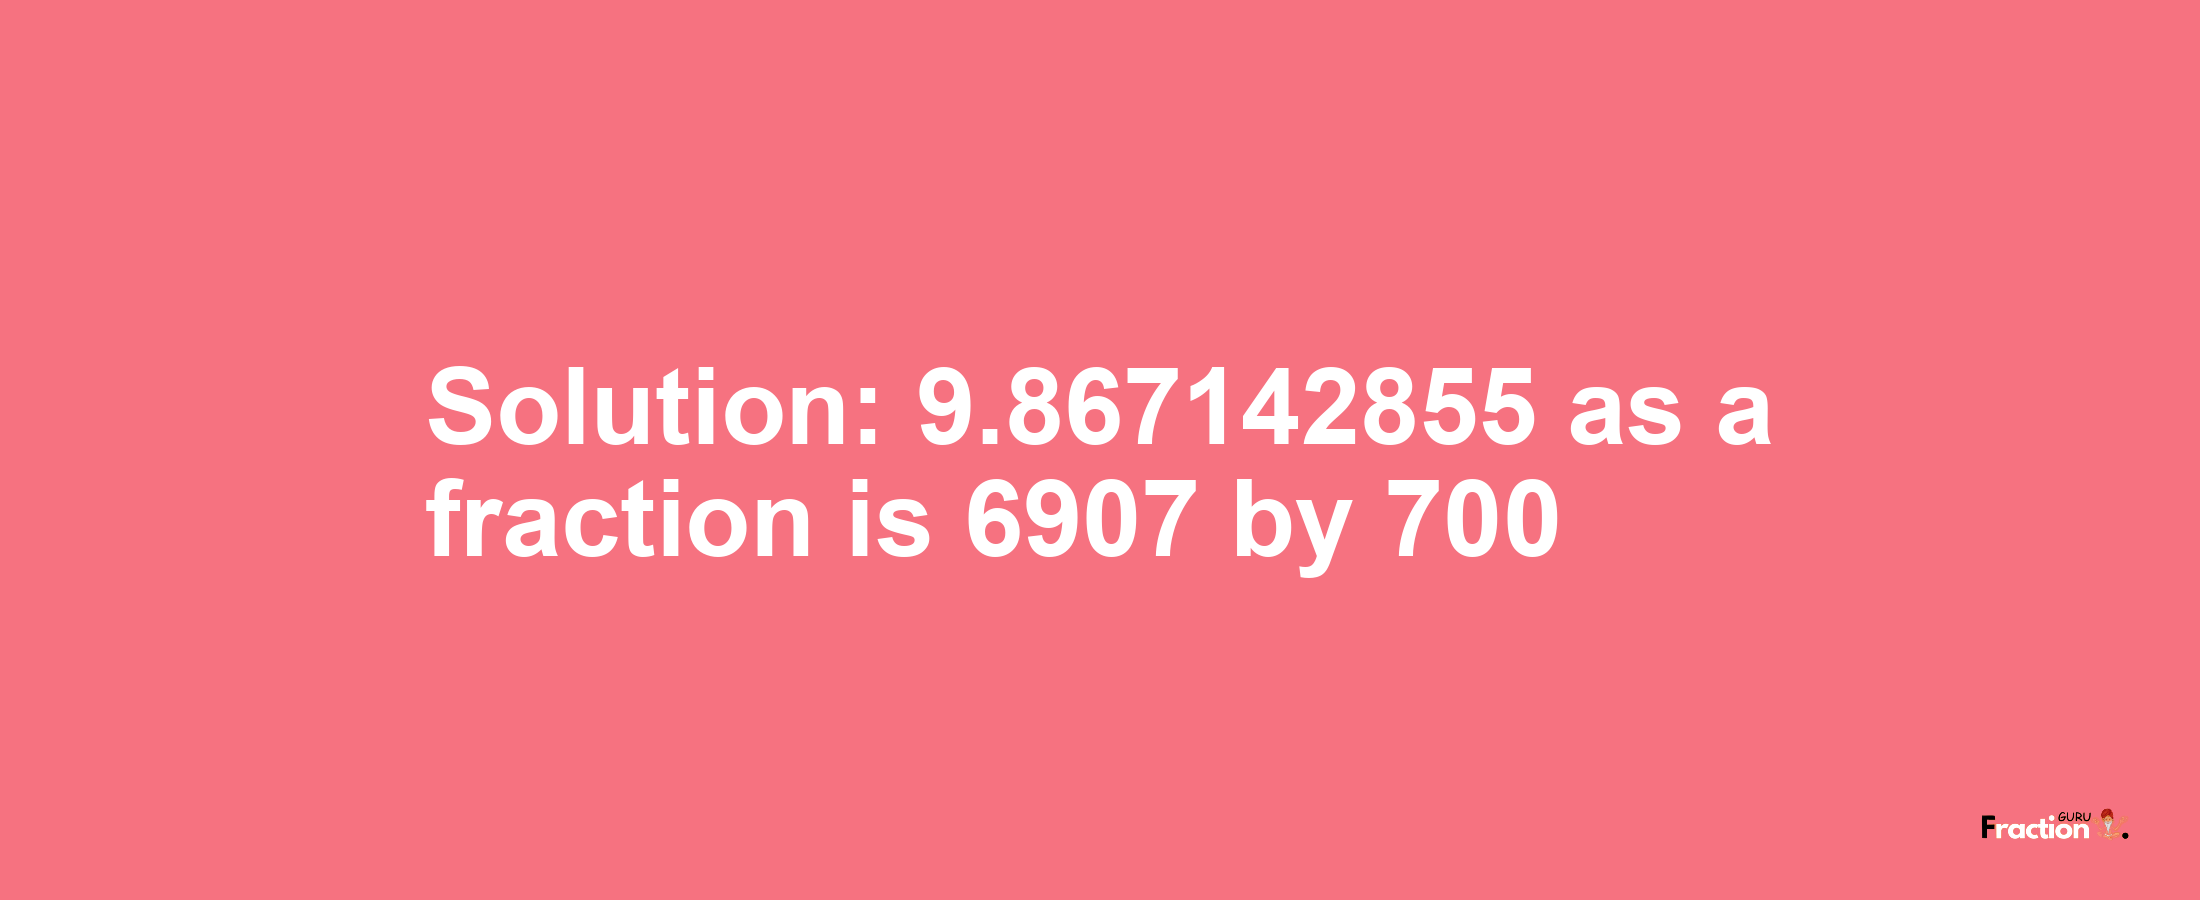 Solution:9.867142855 as a fraction is 6907/700